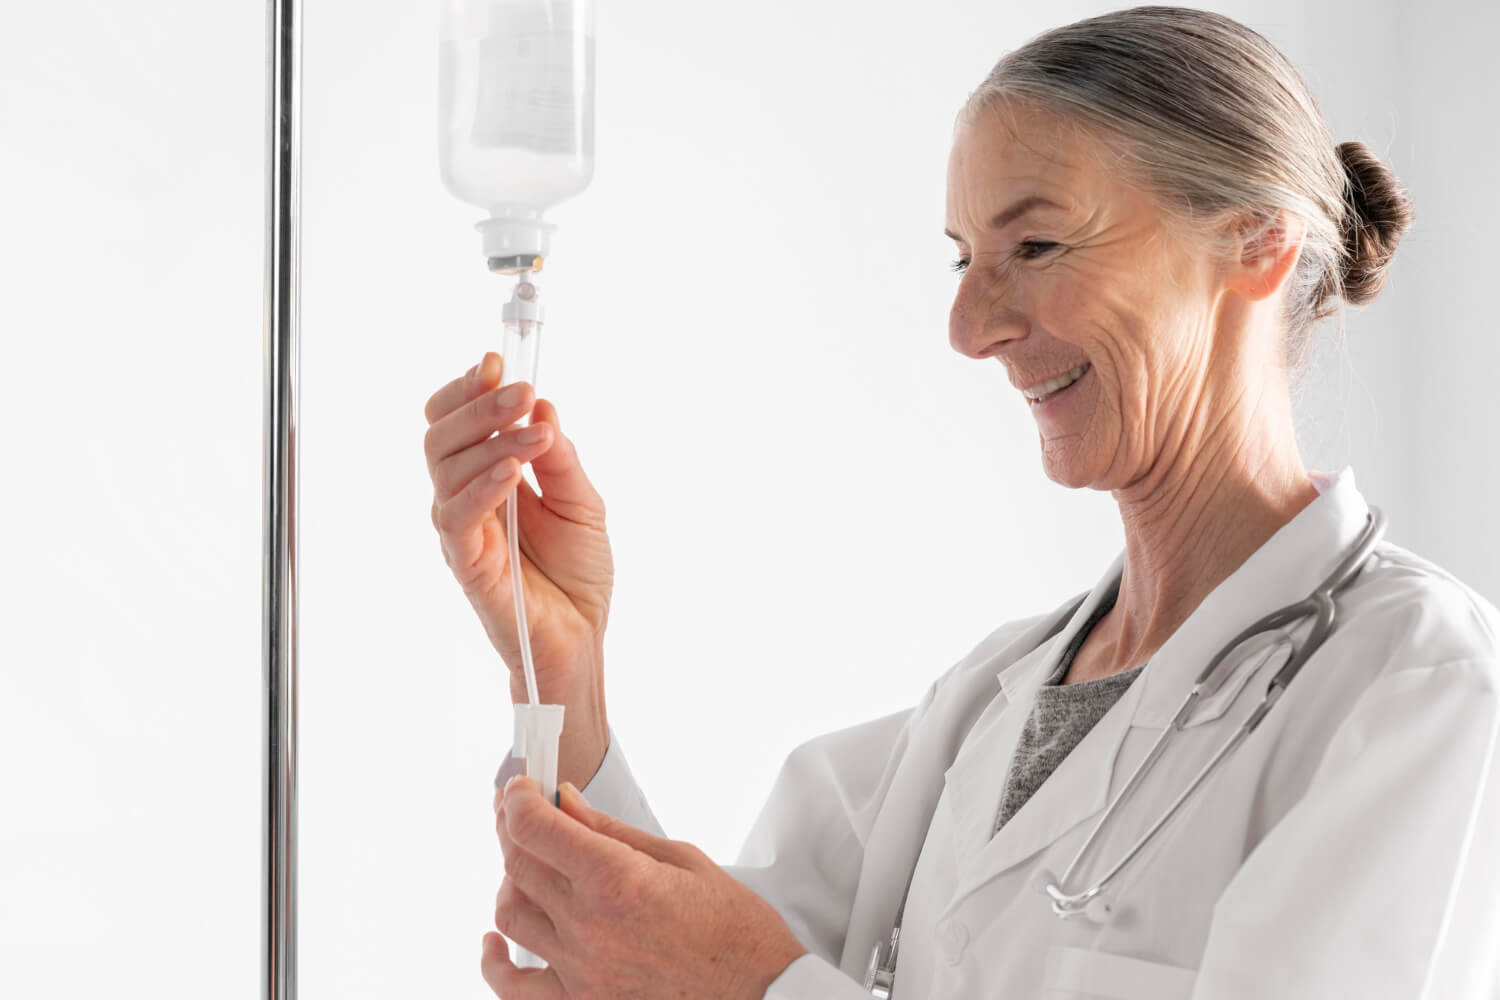 IV therapy benefits are fully unlocked in a drip given by a certified infusion nurse